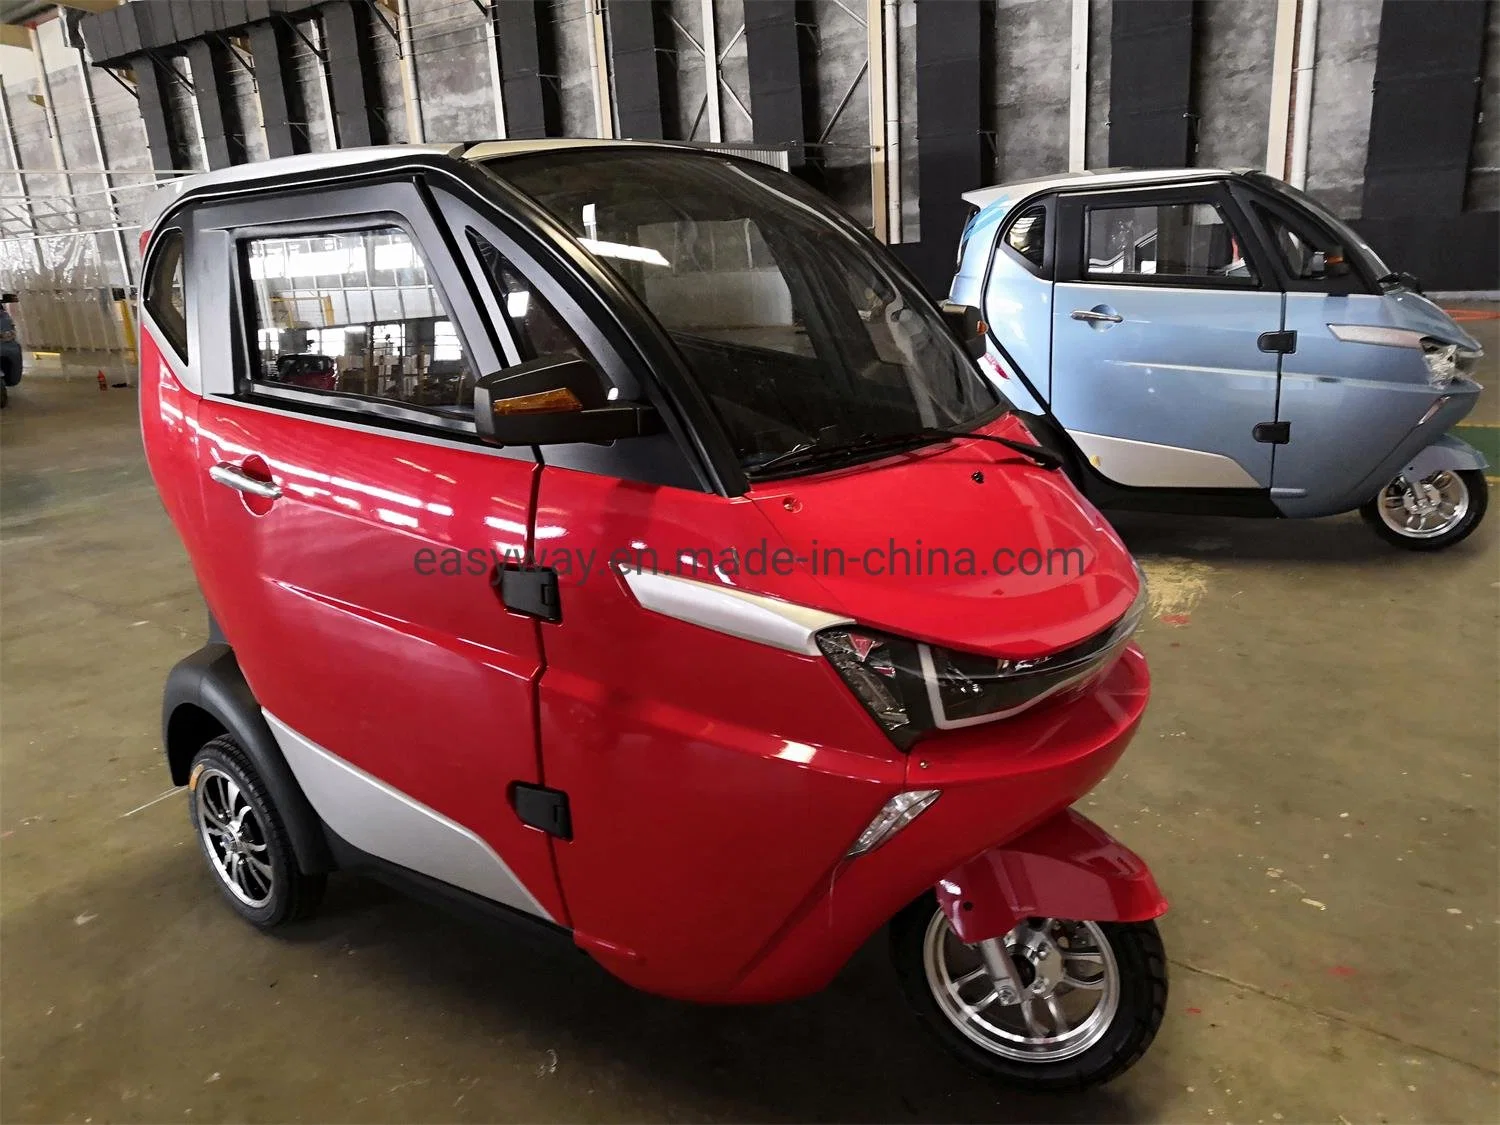 Fashionable Electric Vehicle with Lithium Battery